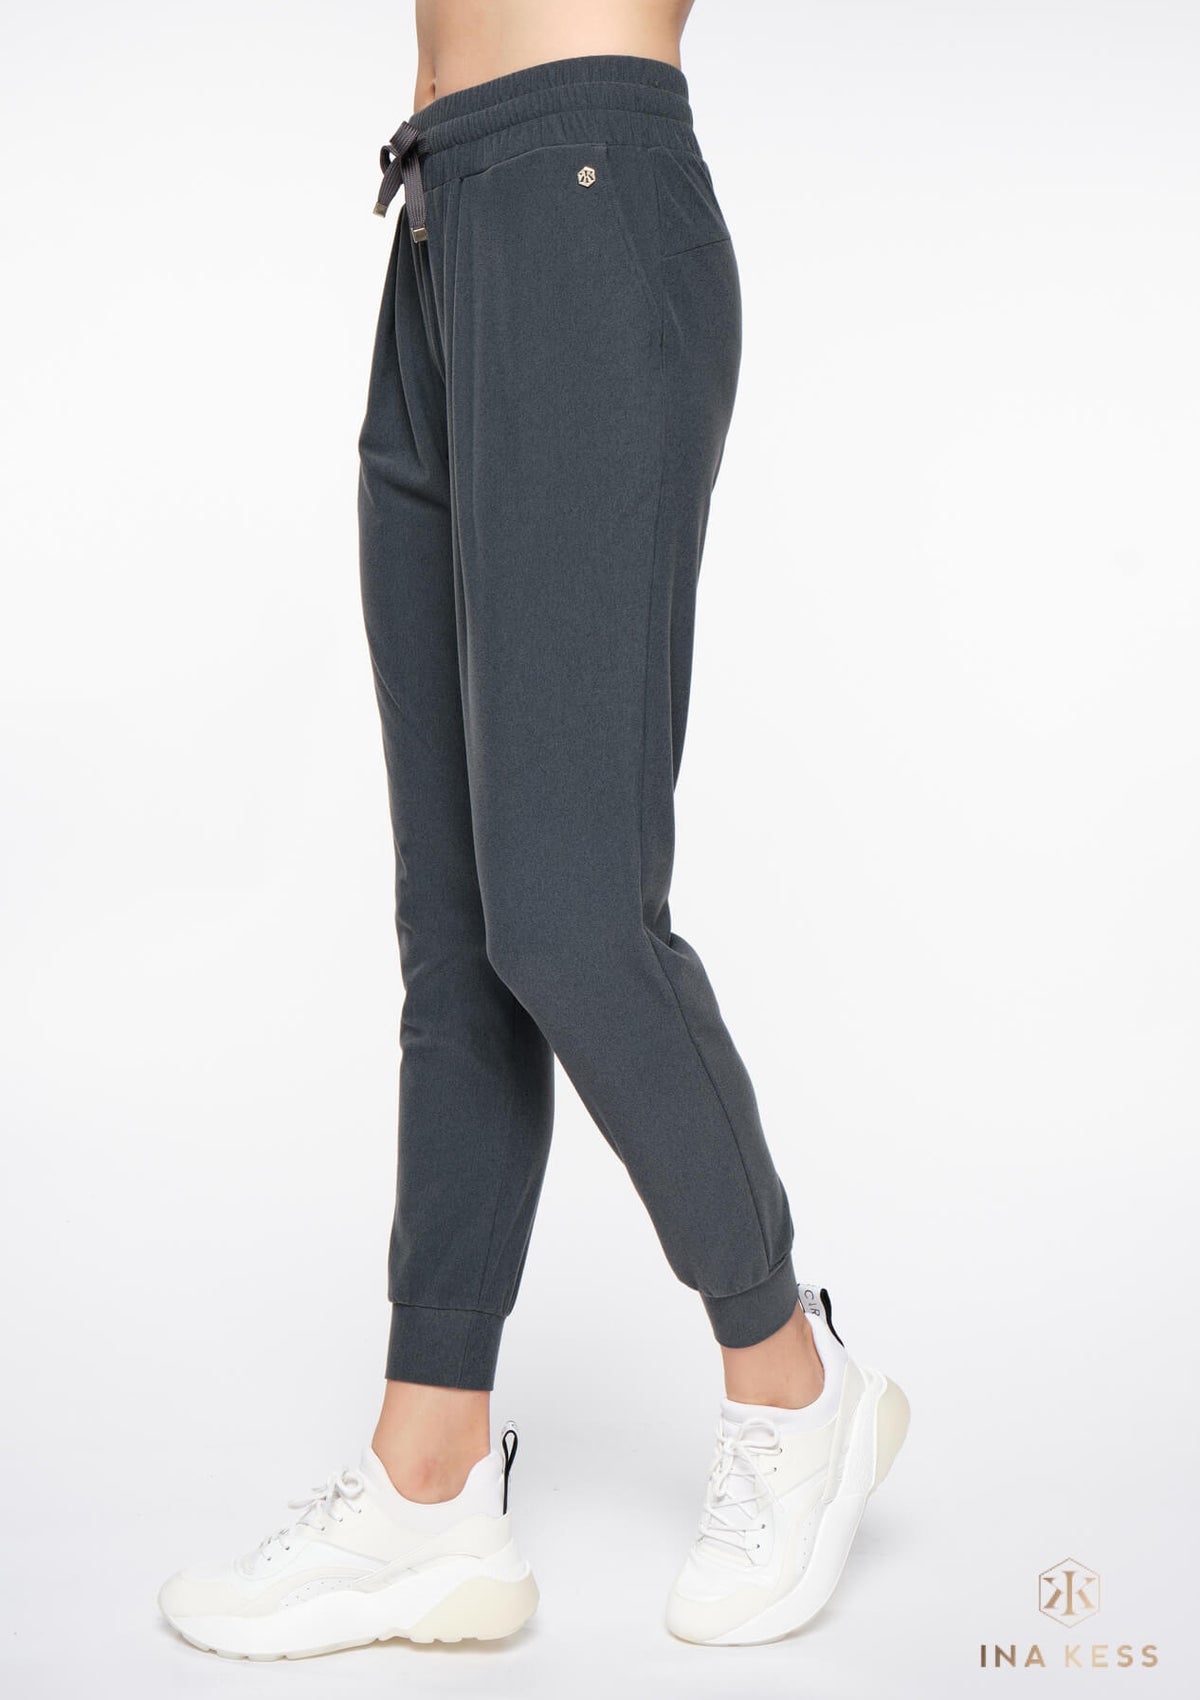 LUXE PLUSH Track Pants anthracite grey